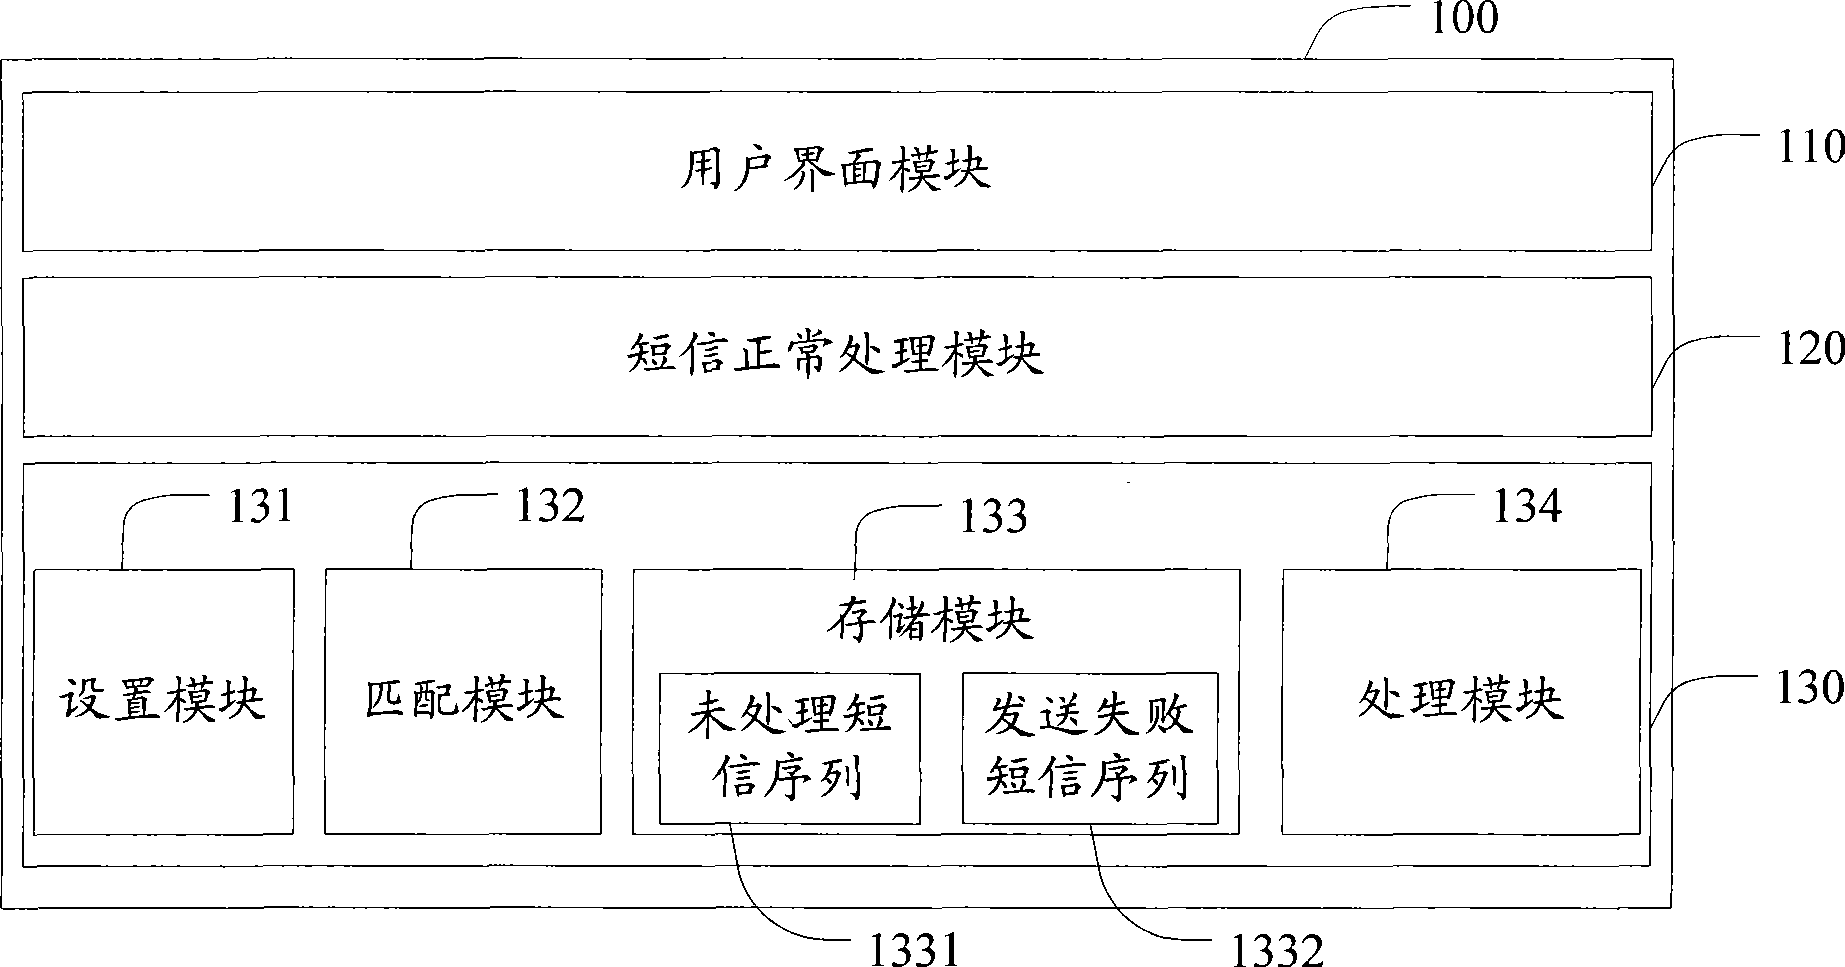 Terminal and method for implementing short message forwarding